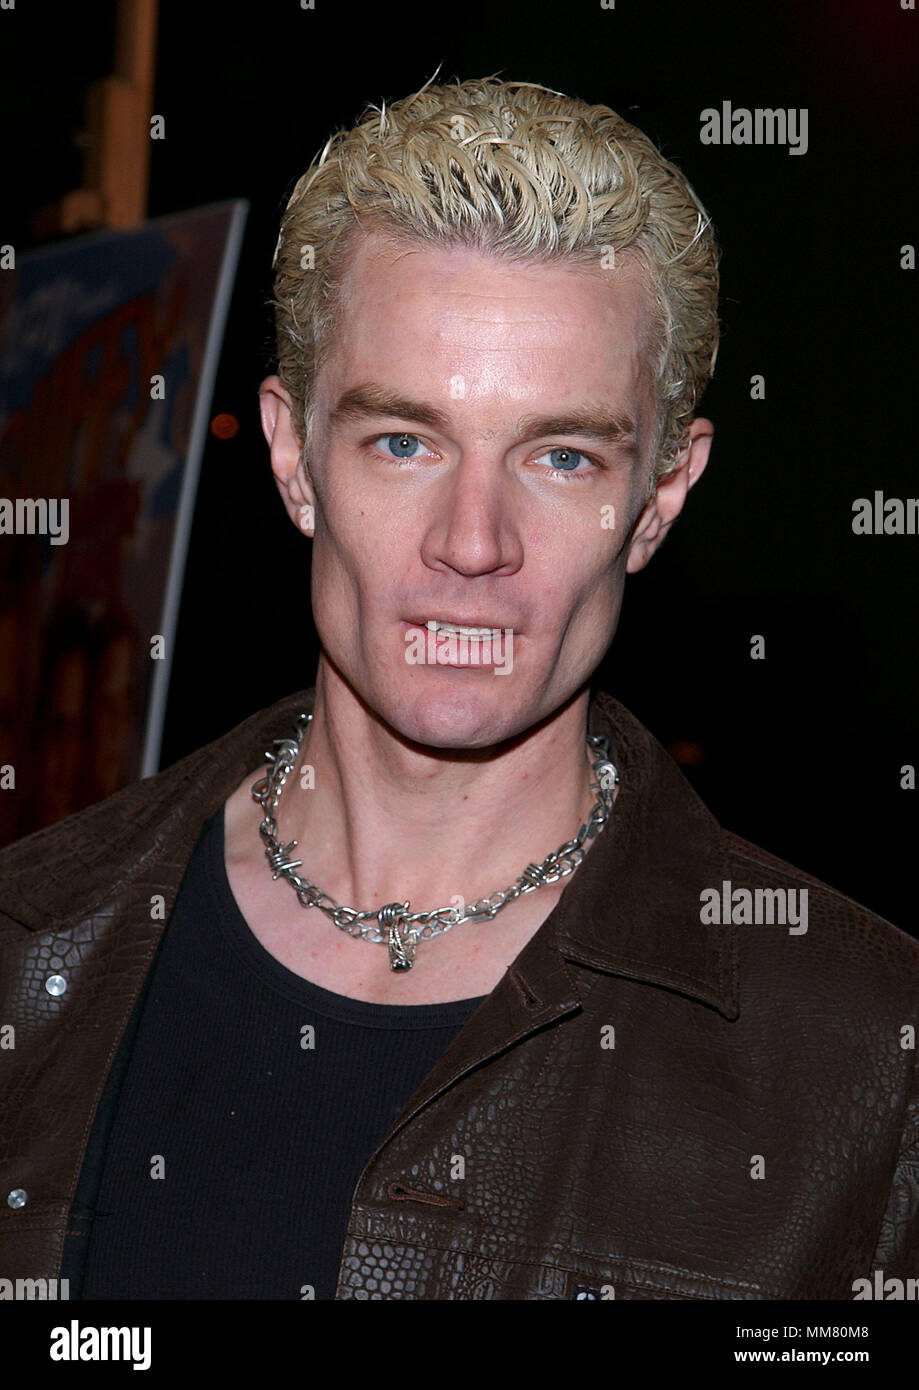 James Marsters posing  at the screening of Buffy The Vampire Slayer, Musical Episode at the Paramount Theatre on the Paramount lot in Los angeles. November 2, 2001.  MarstersJames02.jpgMarstersJames02 Red Carpet Event, Vertical, USA, Film Industry, Celebrities,  Photography, Bestof, Arts Culture and Entertainment, Topix Celebrities fashion /  Vertical, Best of, Event in Hollywood Life - California,  Red Carpet and backstage, USA, Film Industry, Celebrities,  movie celebrities, TV celebrities, Music celebrities, Photography, Bestof, Arts Culture and Entertainment,  Topix, headshot, vertical, on Stock Photo